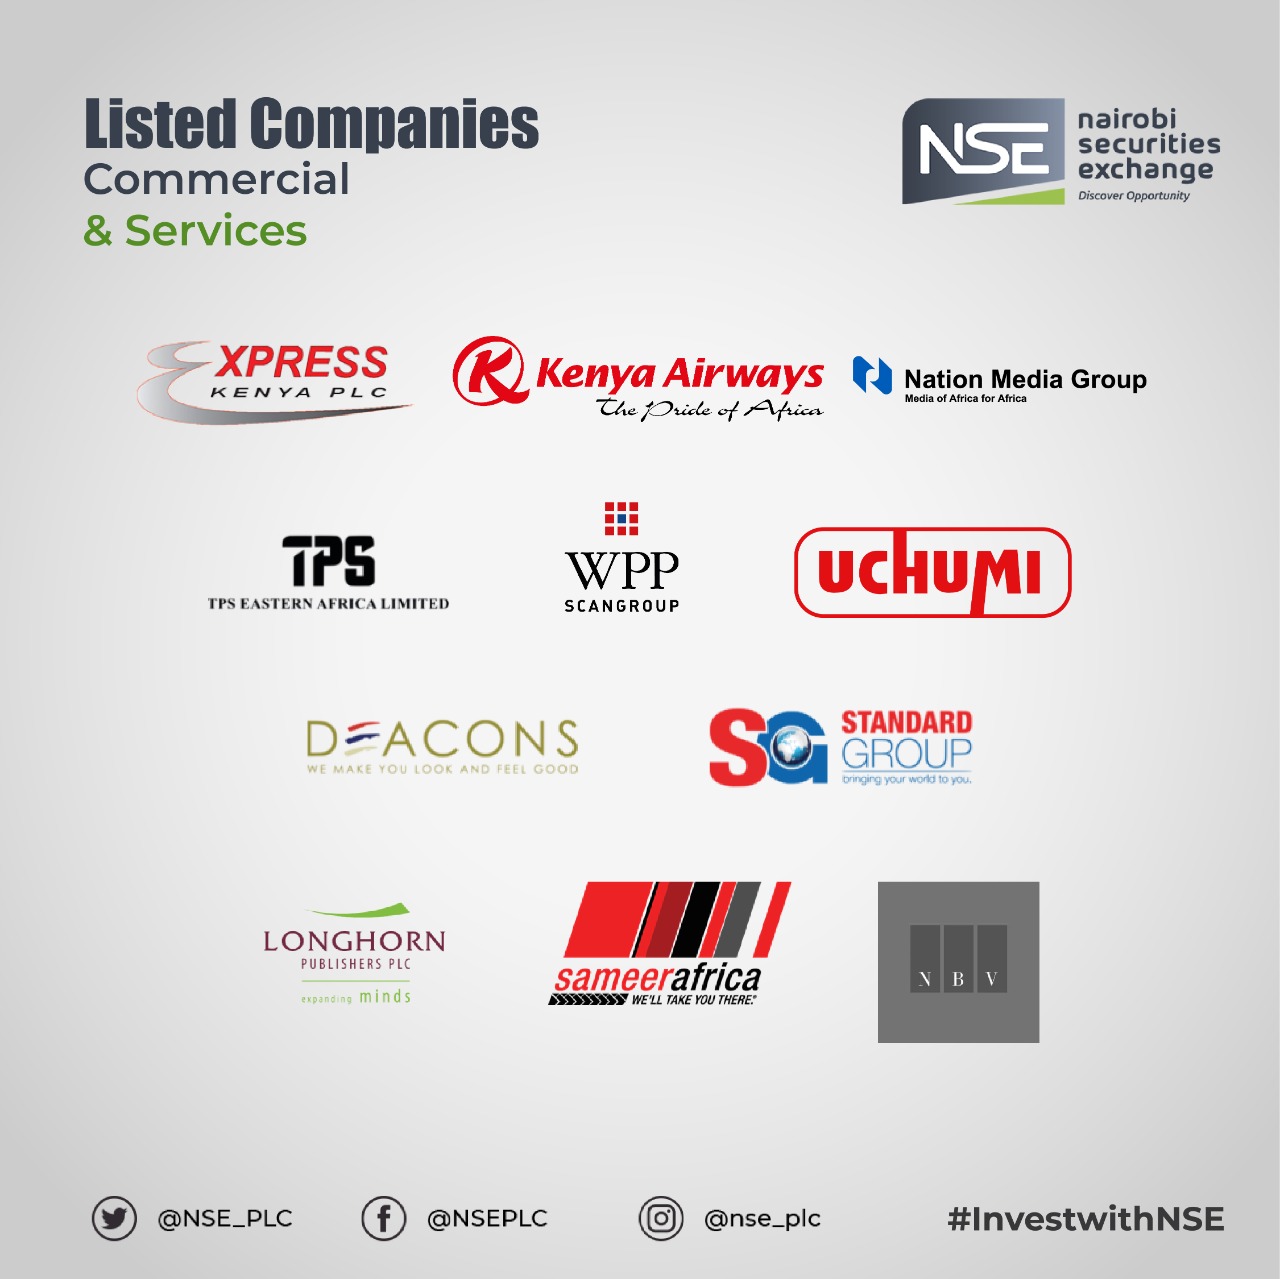  Commercial and services companies on the NSE